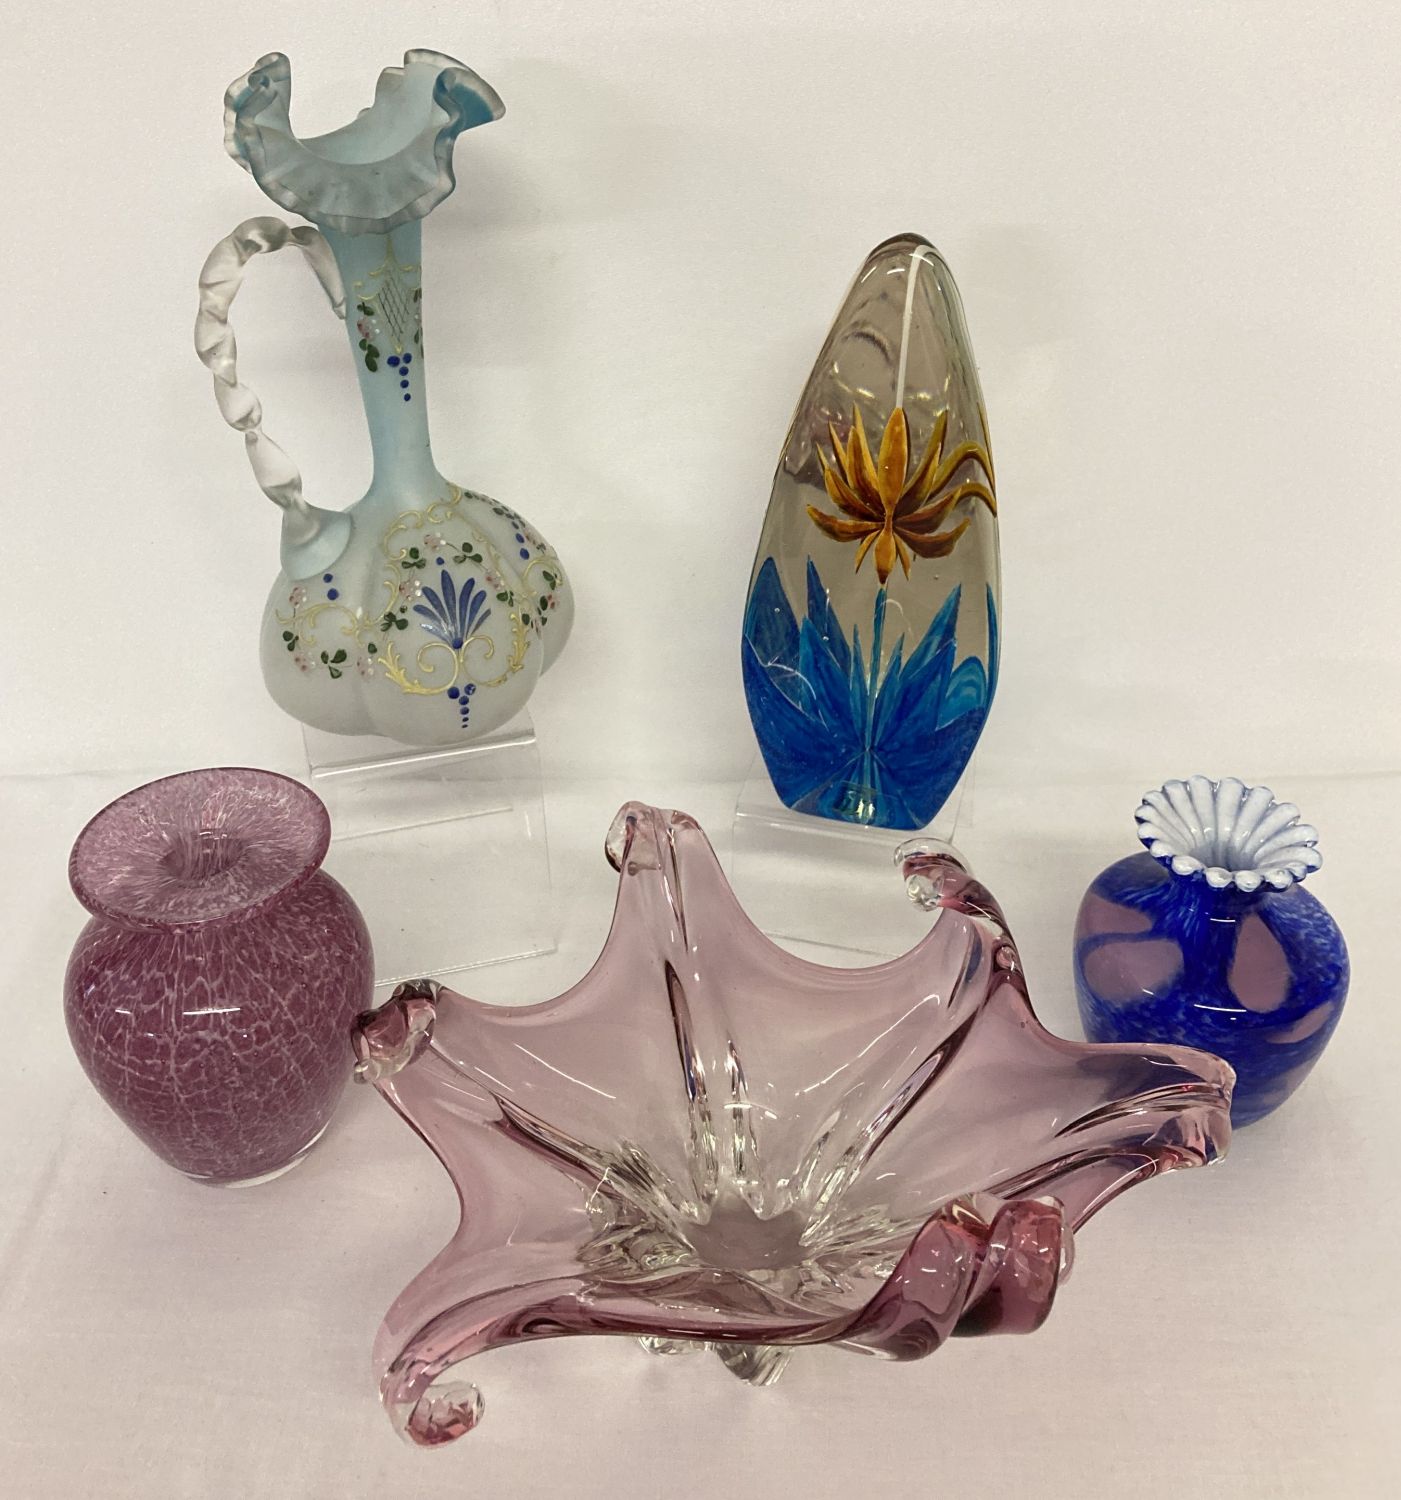 5 pieces of glass ware to include Caithness and Maltese style vases.